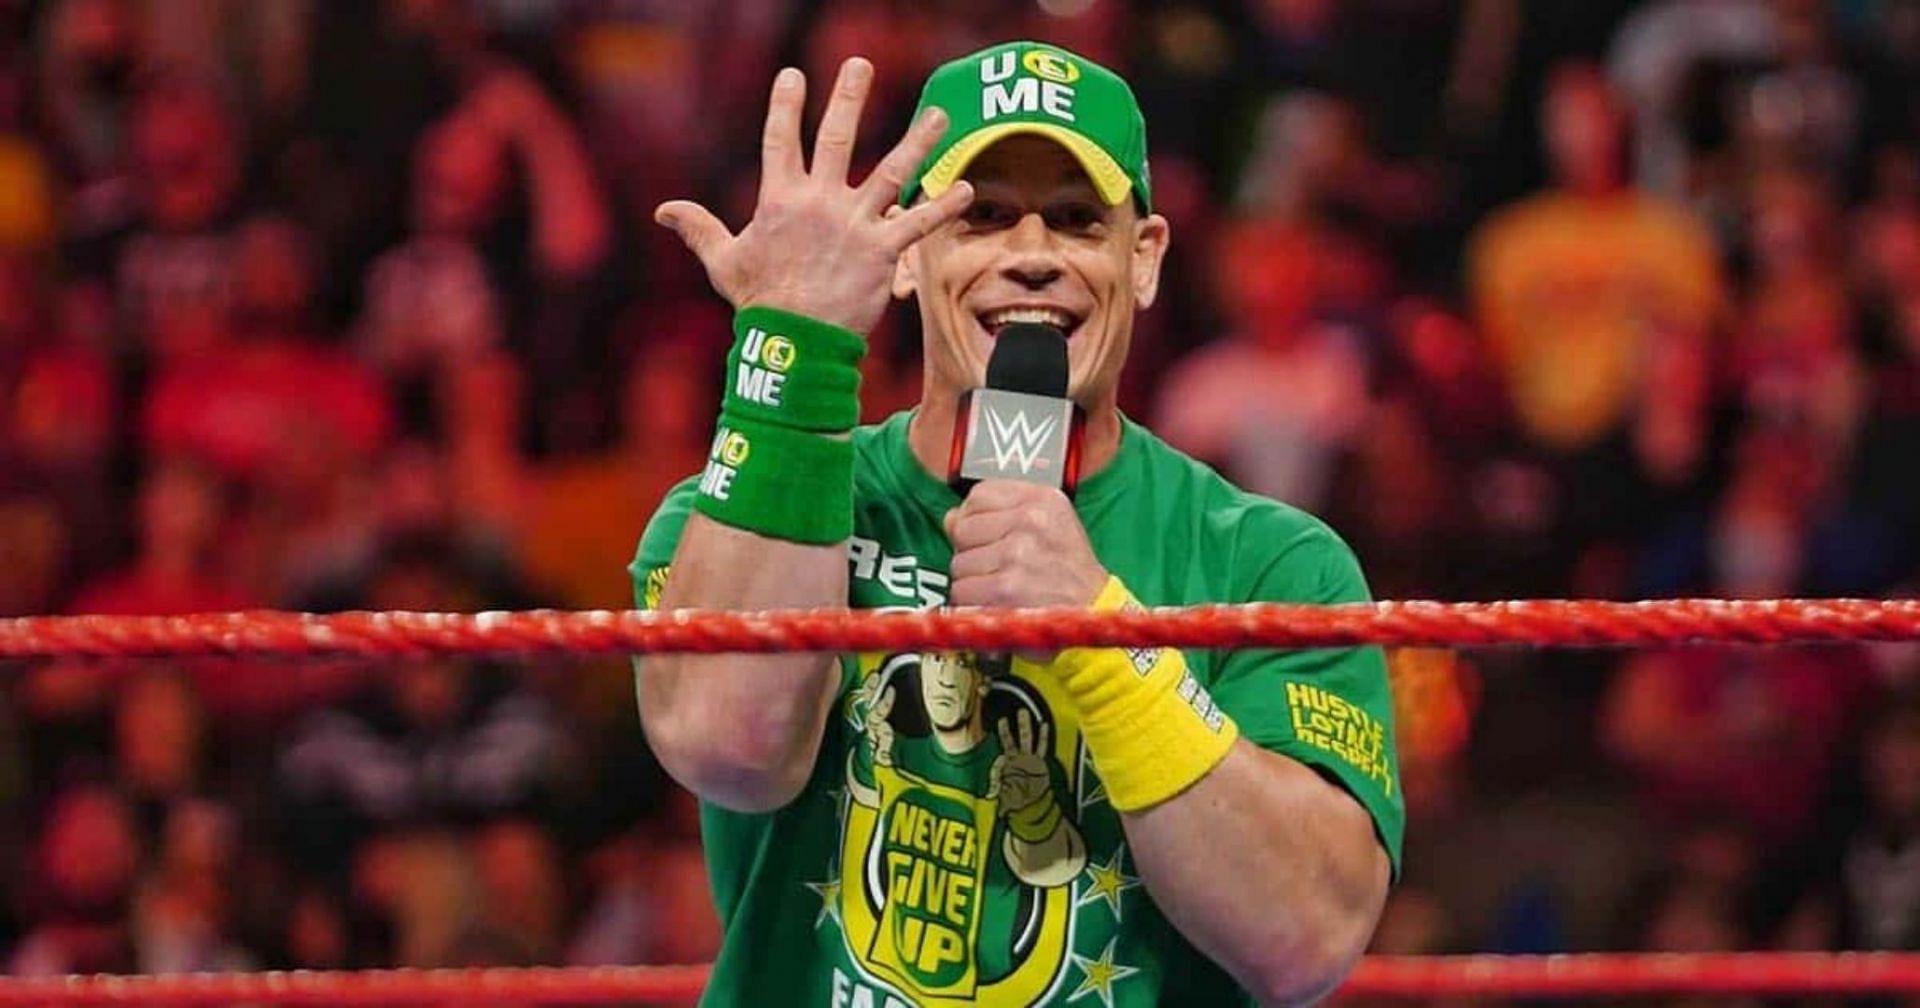 A phrase mocking Cena was banned by WWE.